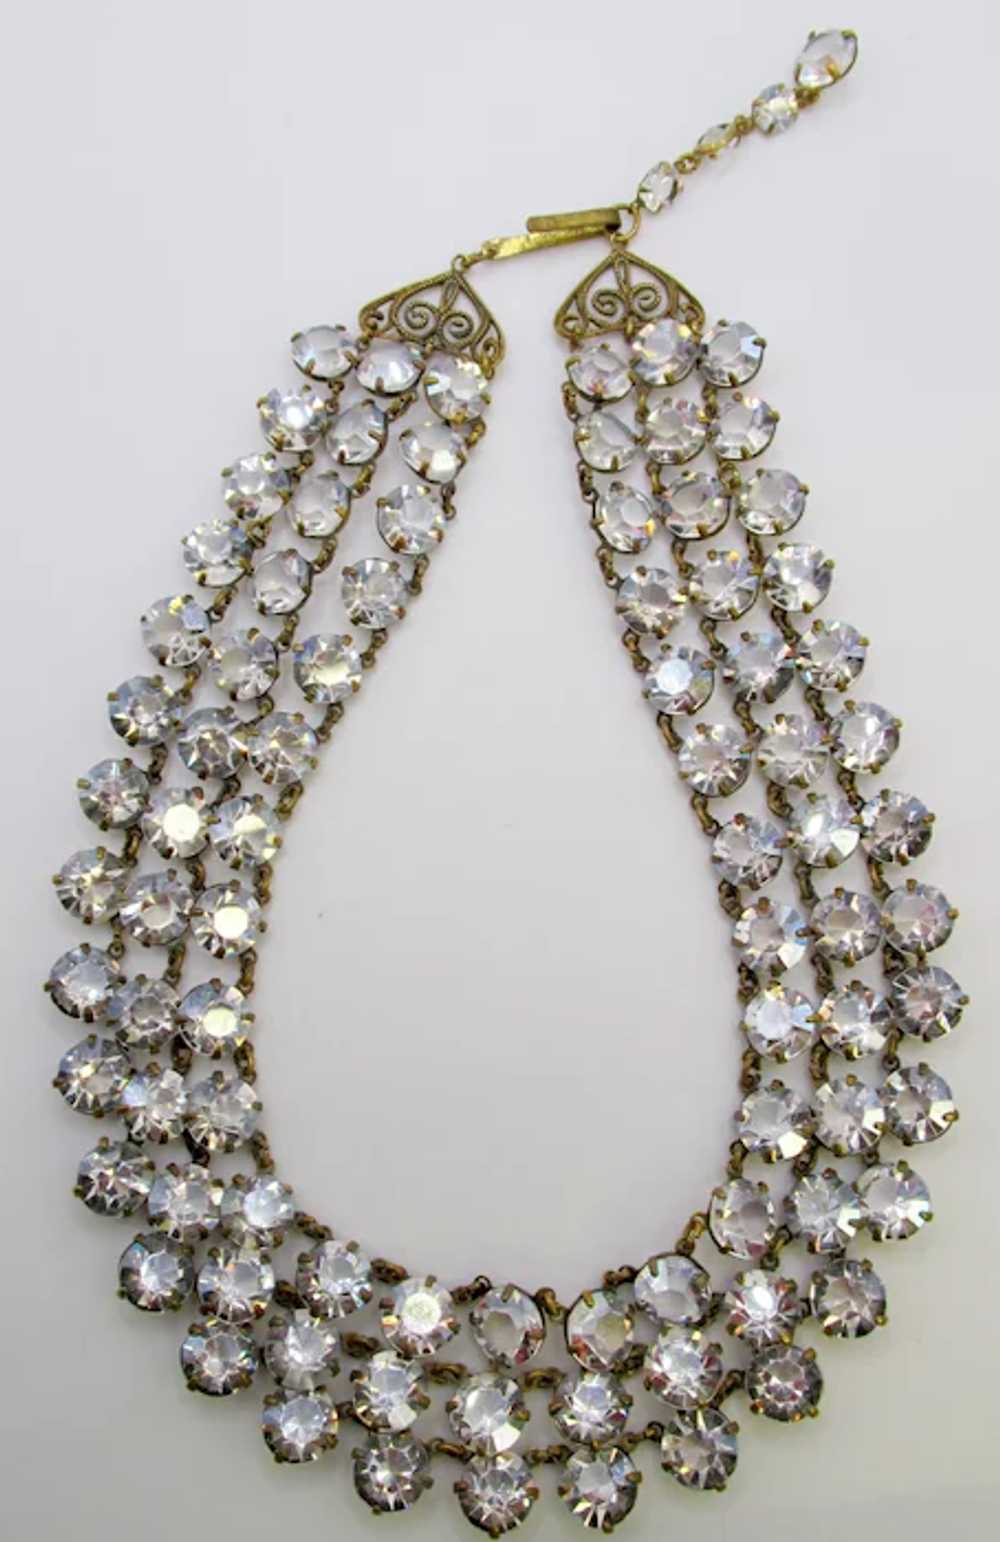 West Germany Triple Strand Crystal Chaton Necklace - image 2